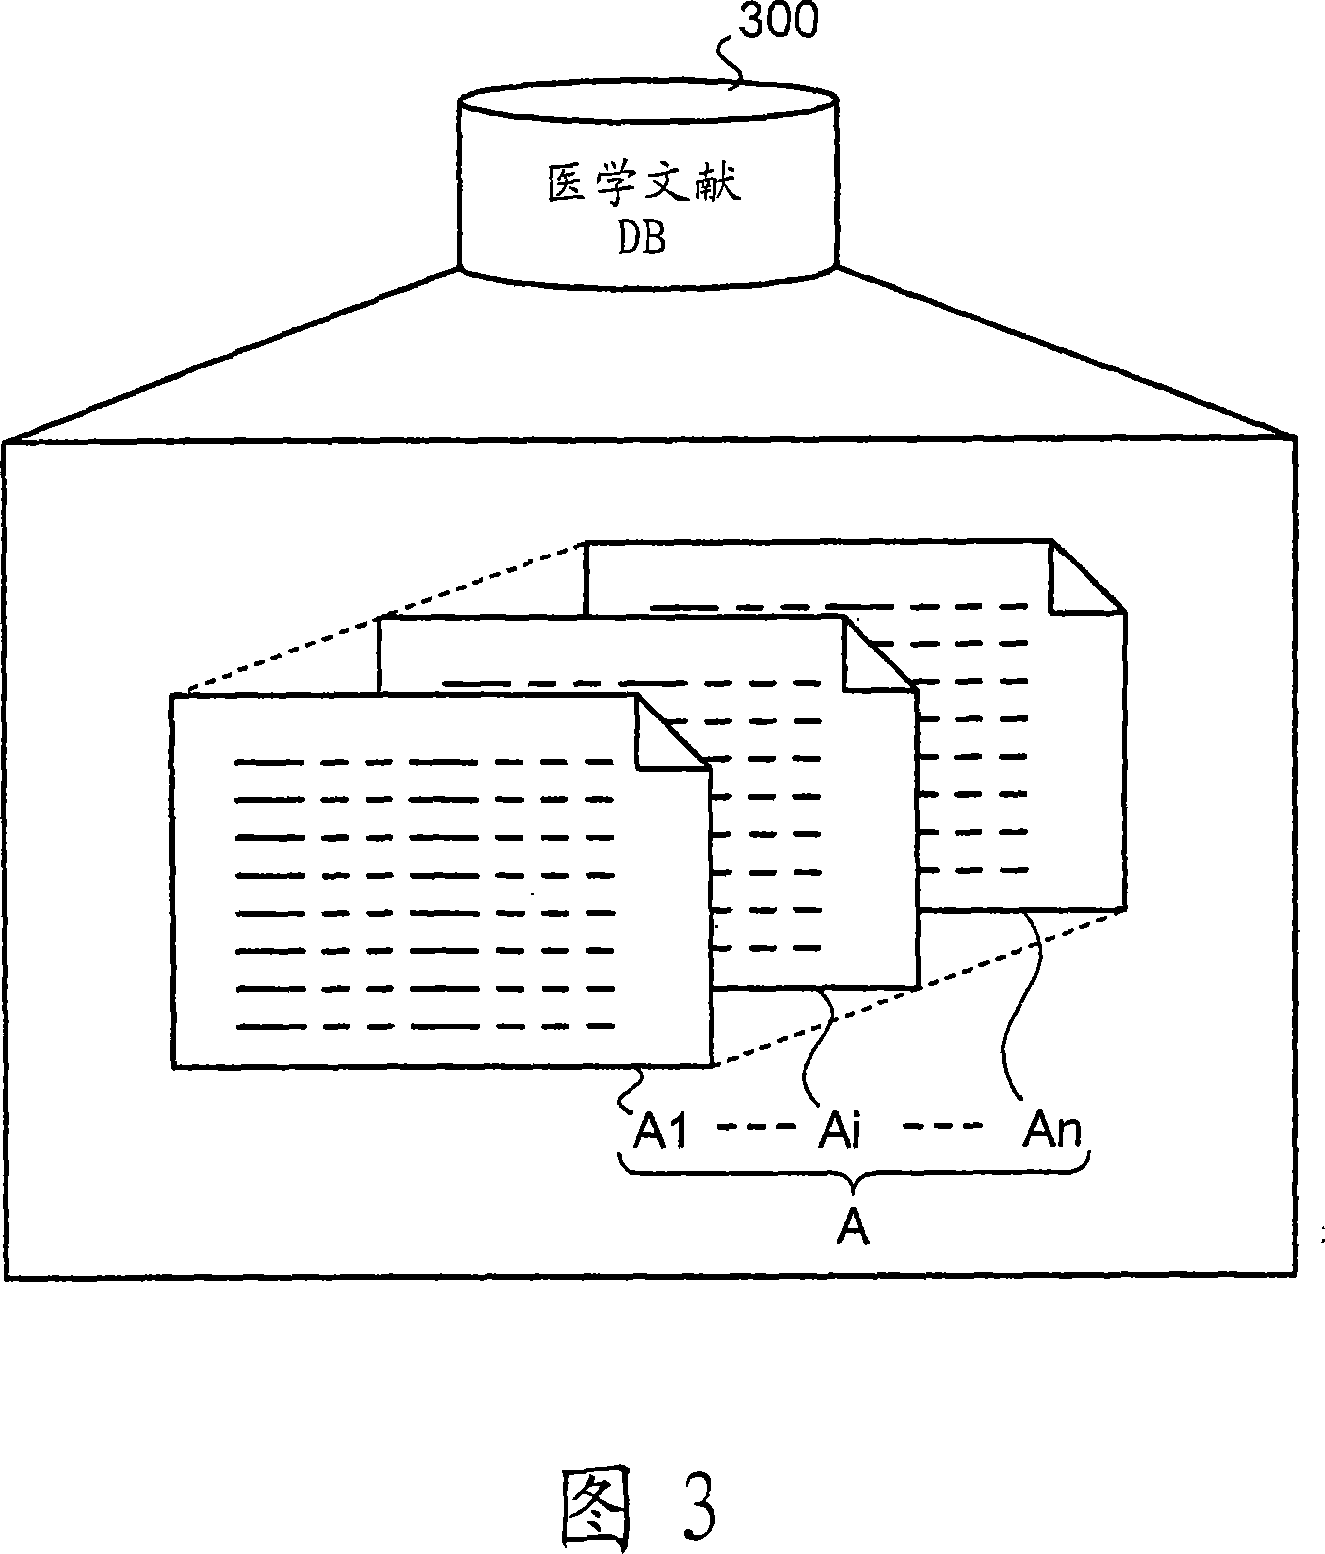 Method and apparatus for supporting analysis of gene interaction network, and computer product